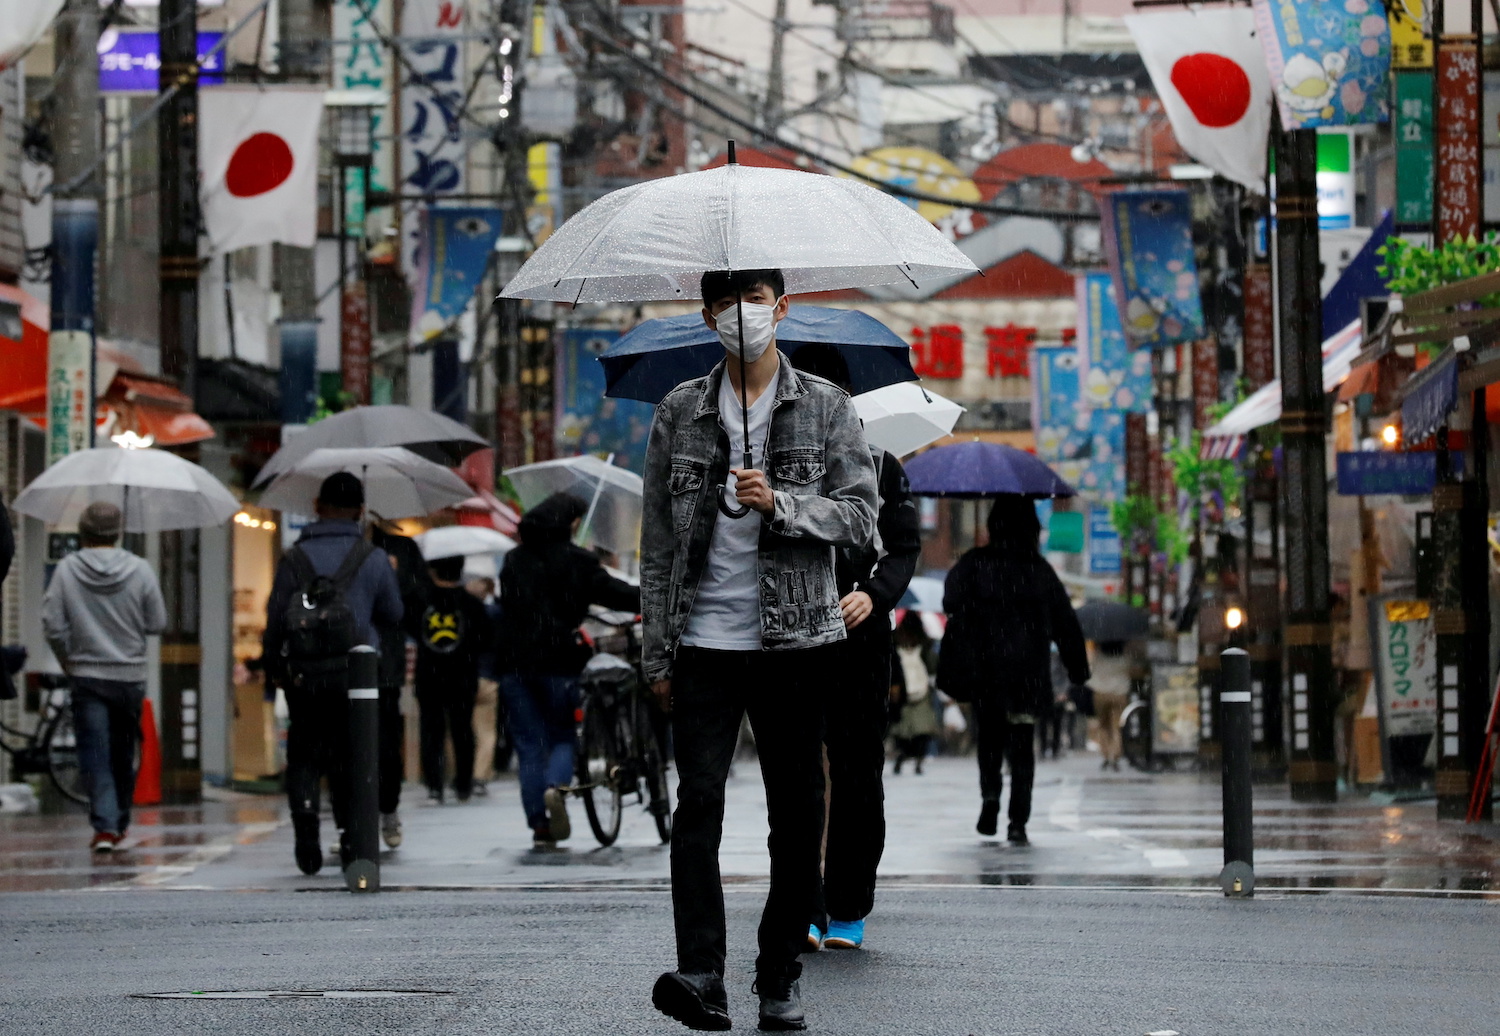 Japan’s Falling Covid-19 Cases Defy Asia Rebound